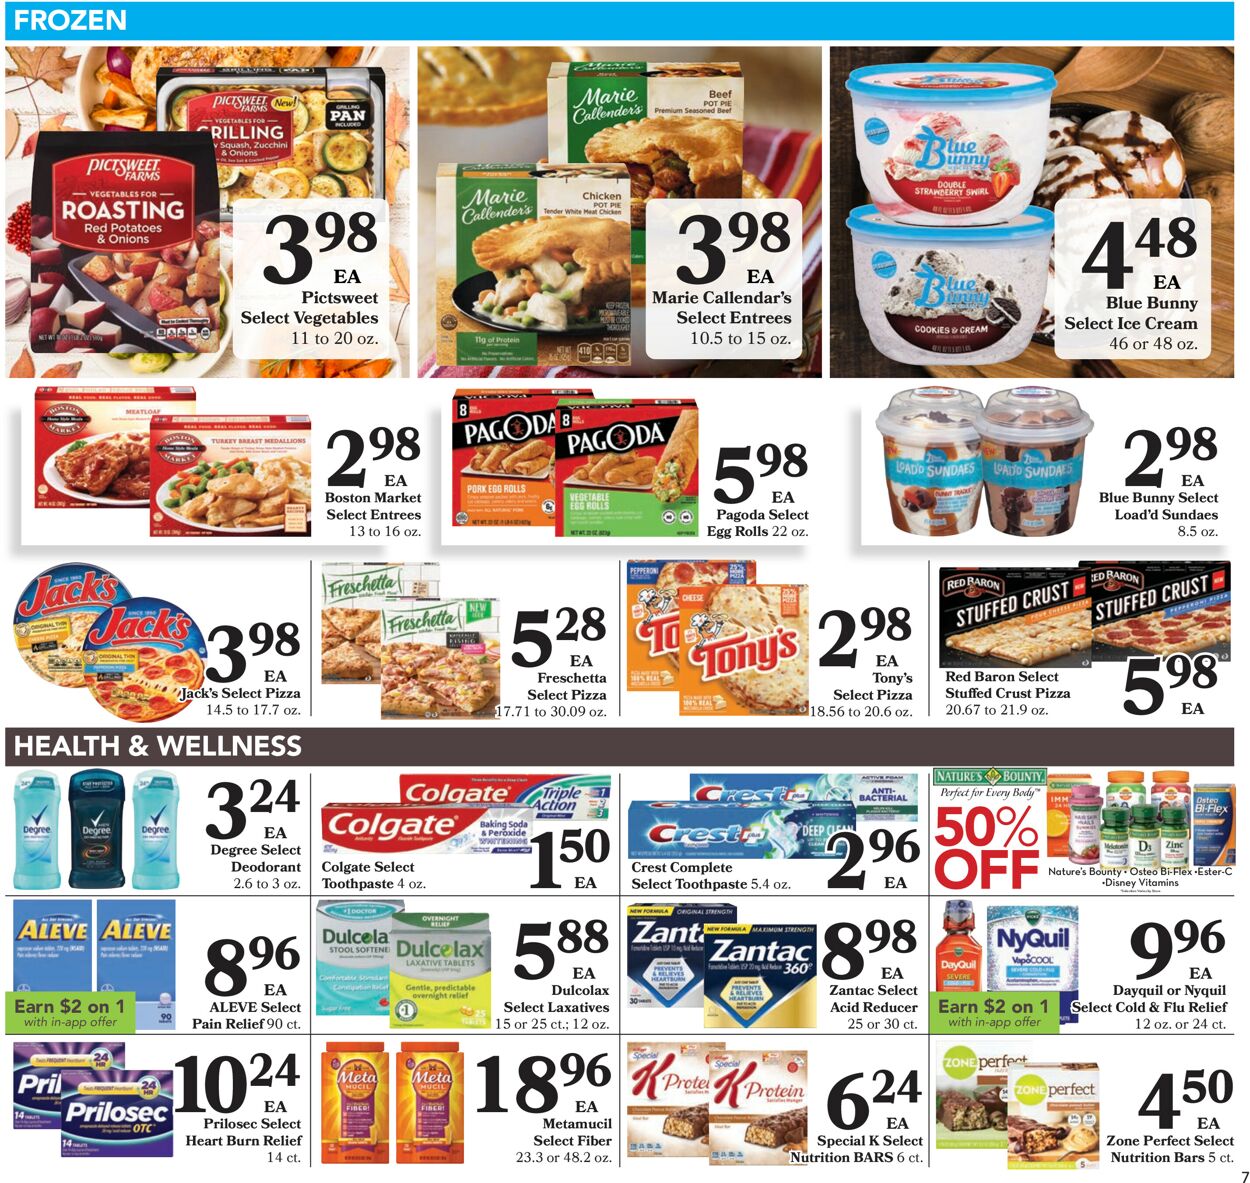 Harps Foods Ad from 09/21/2022